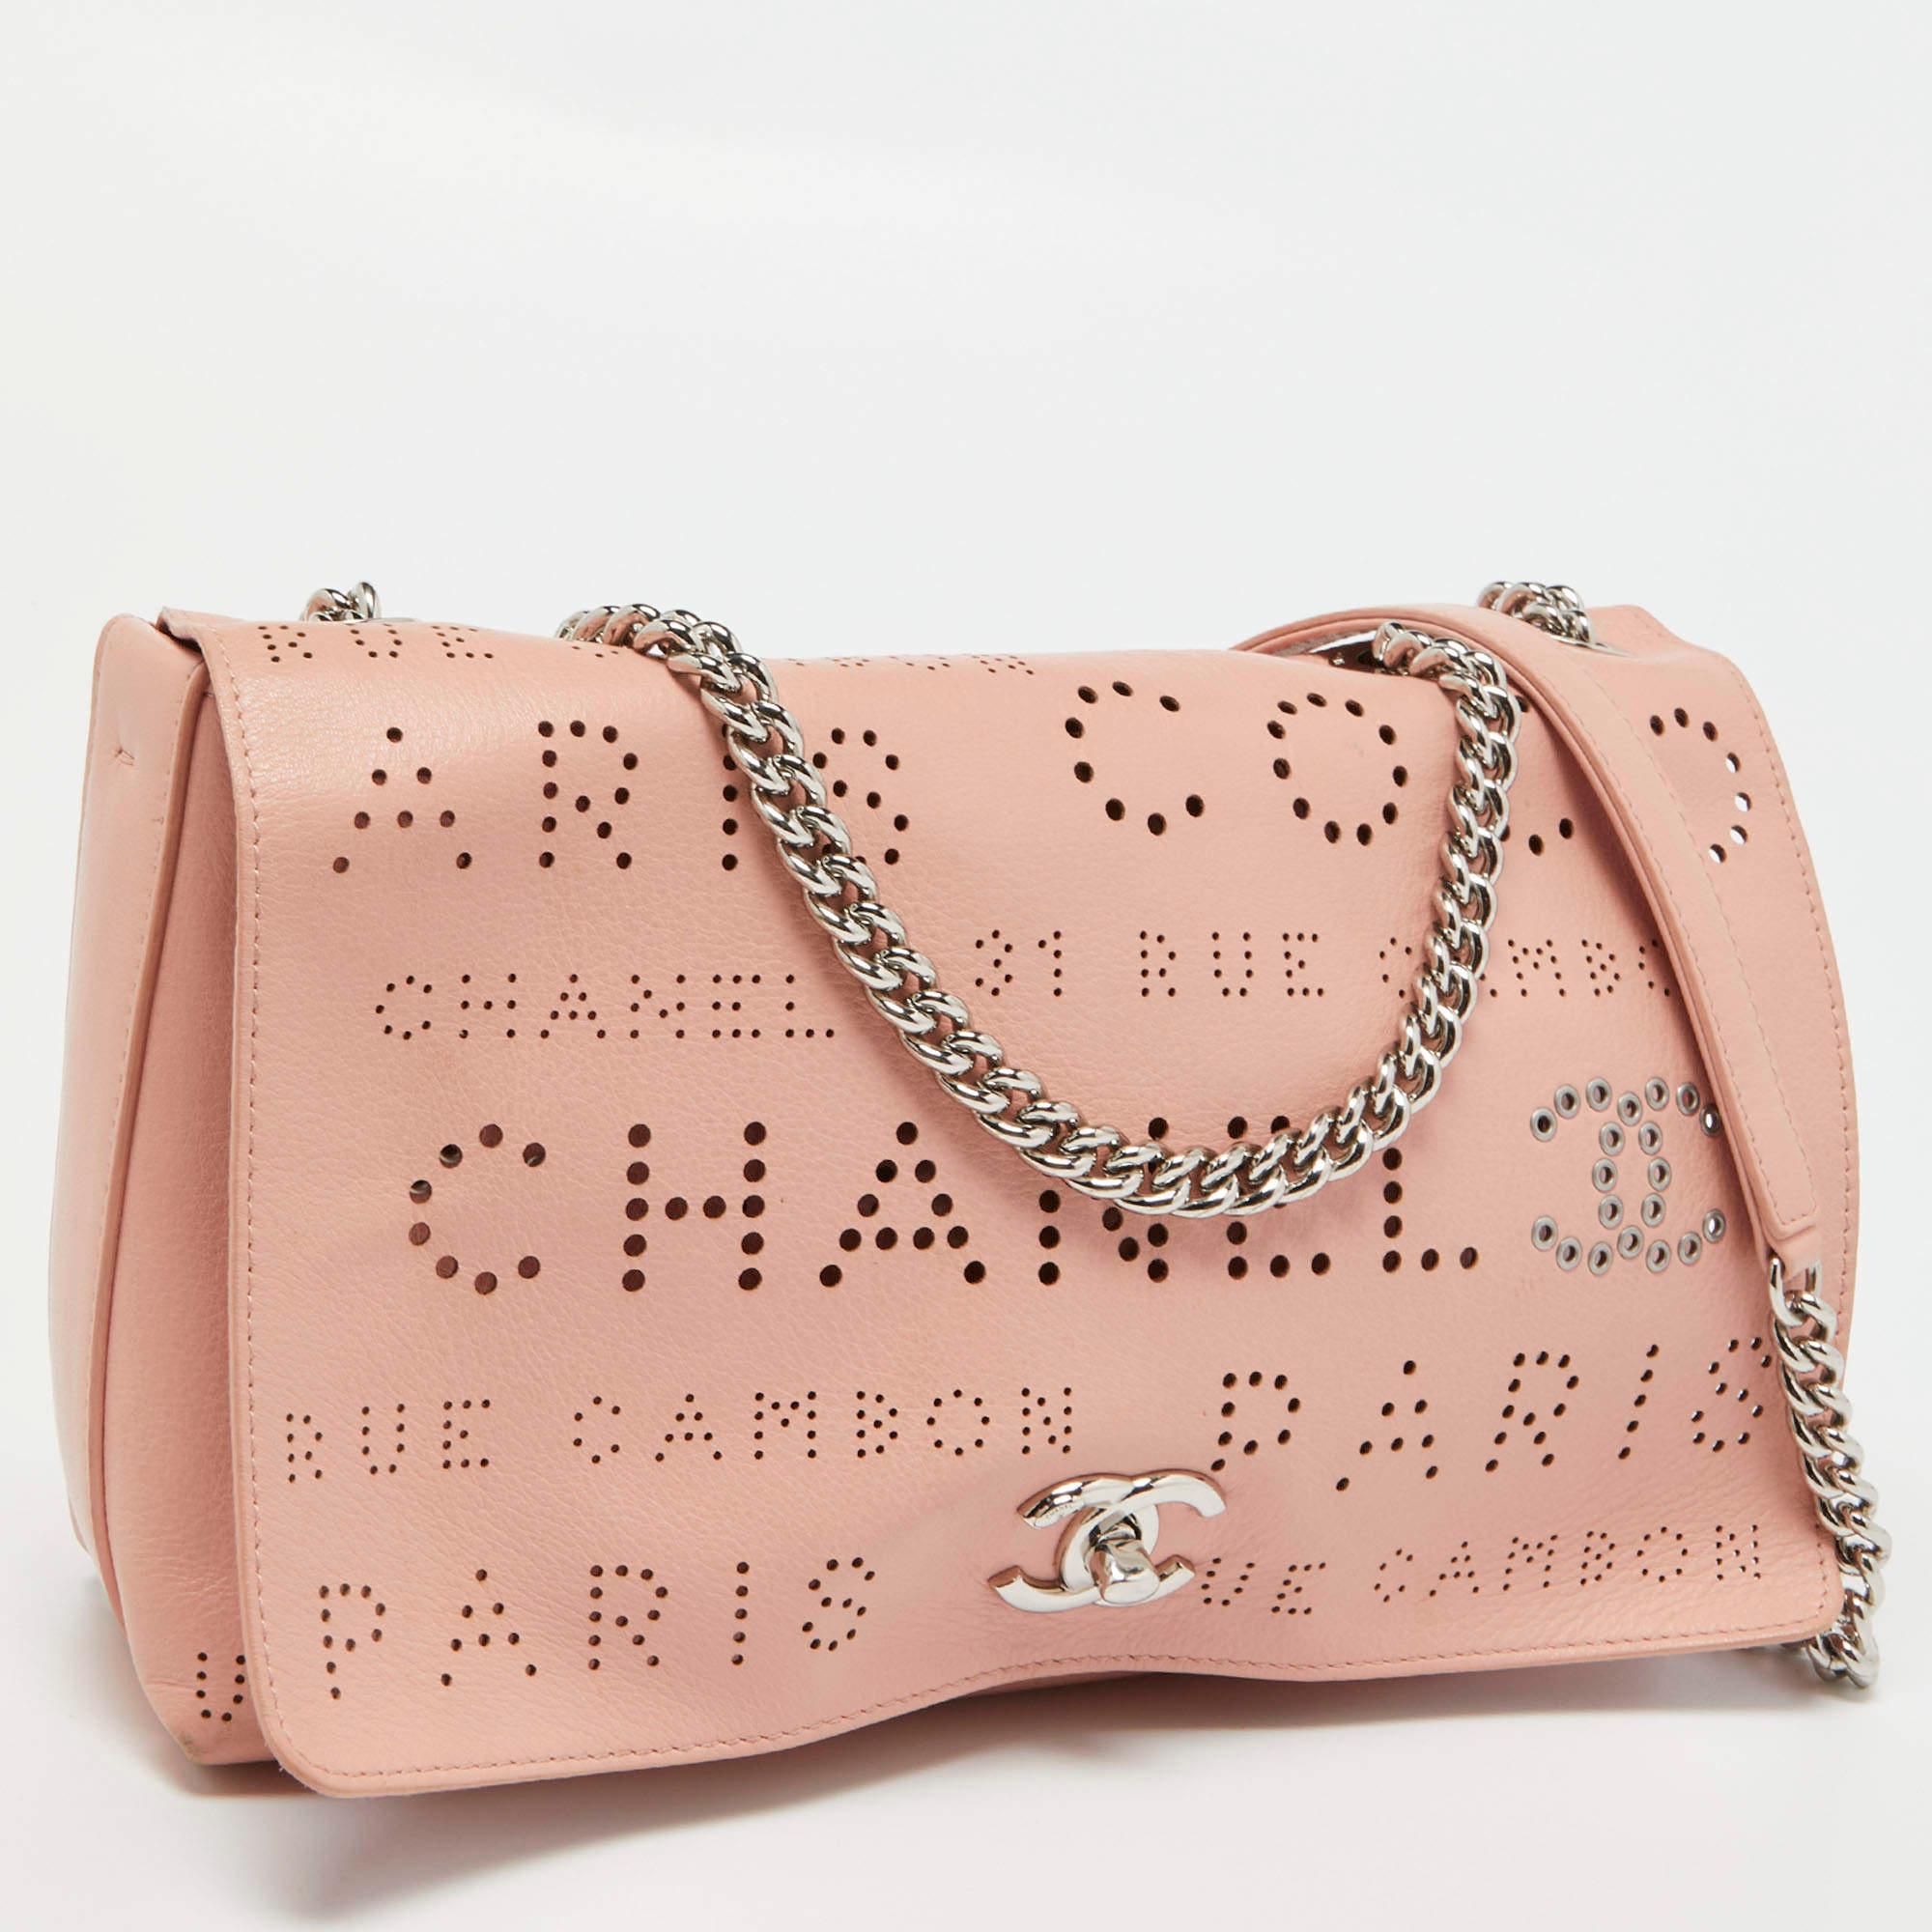 Chanel Light Pink Leather Perforated Logo Flap Bag In Good Condition In Dubai, Al Qouz 2